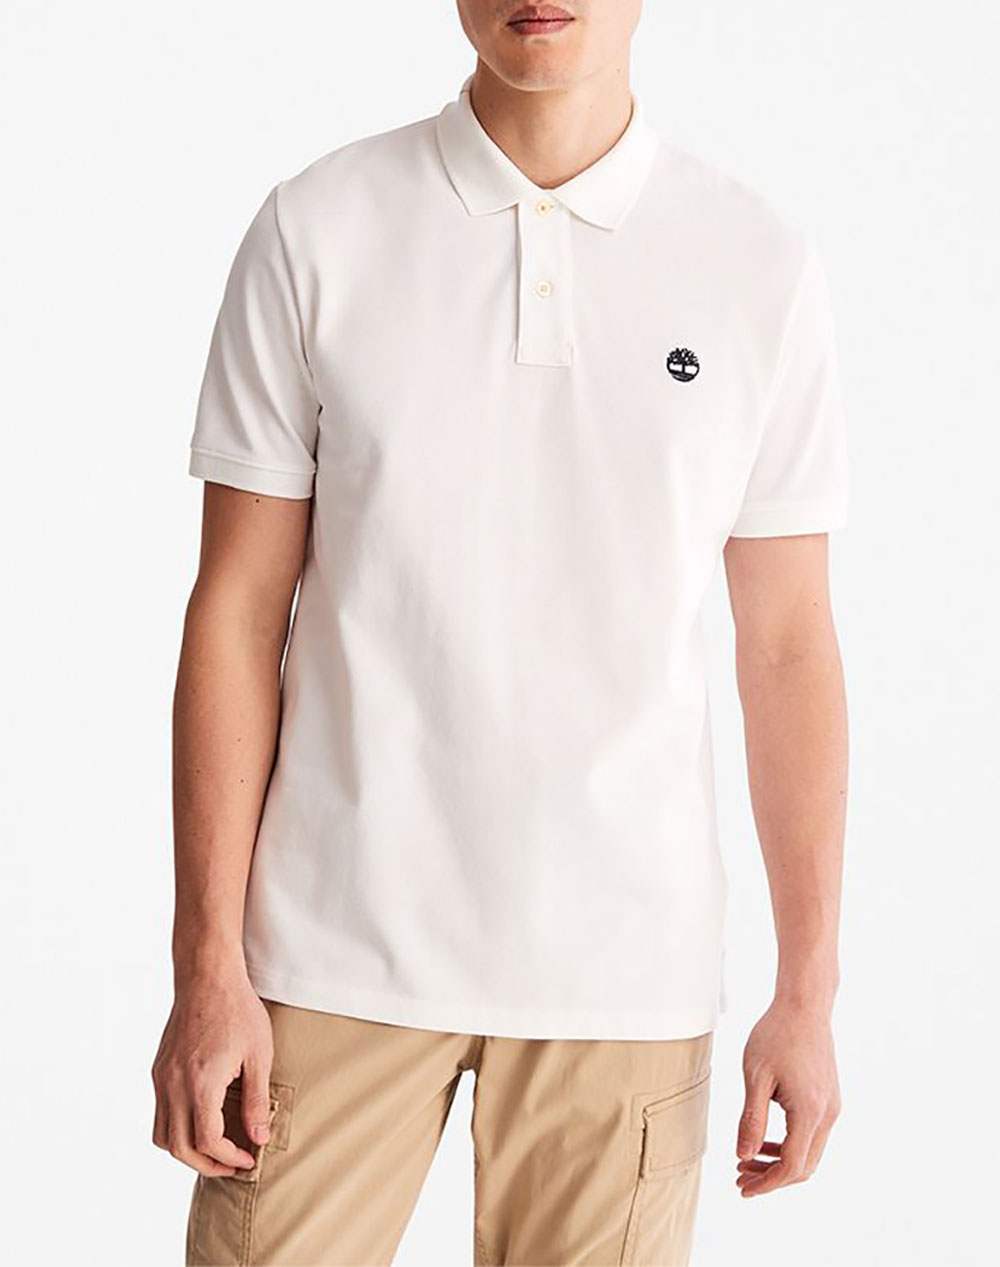 TIMBERLAND Pique Short Sleeve Polo TB0A26N4-100 White